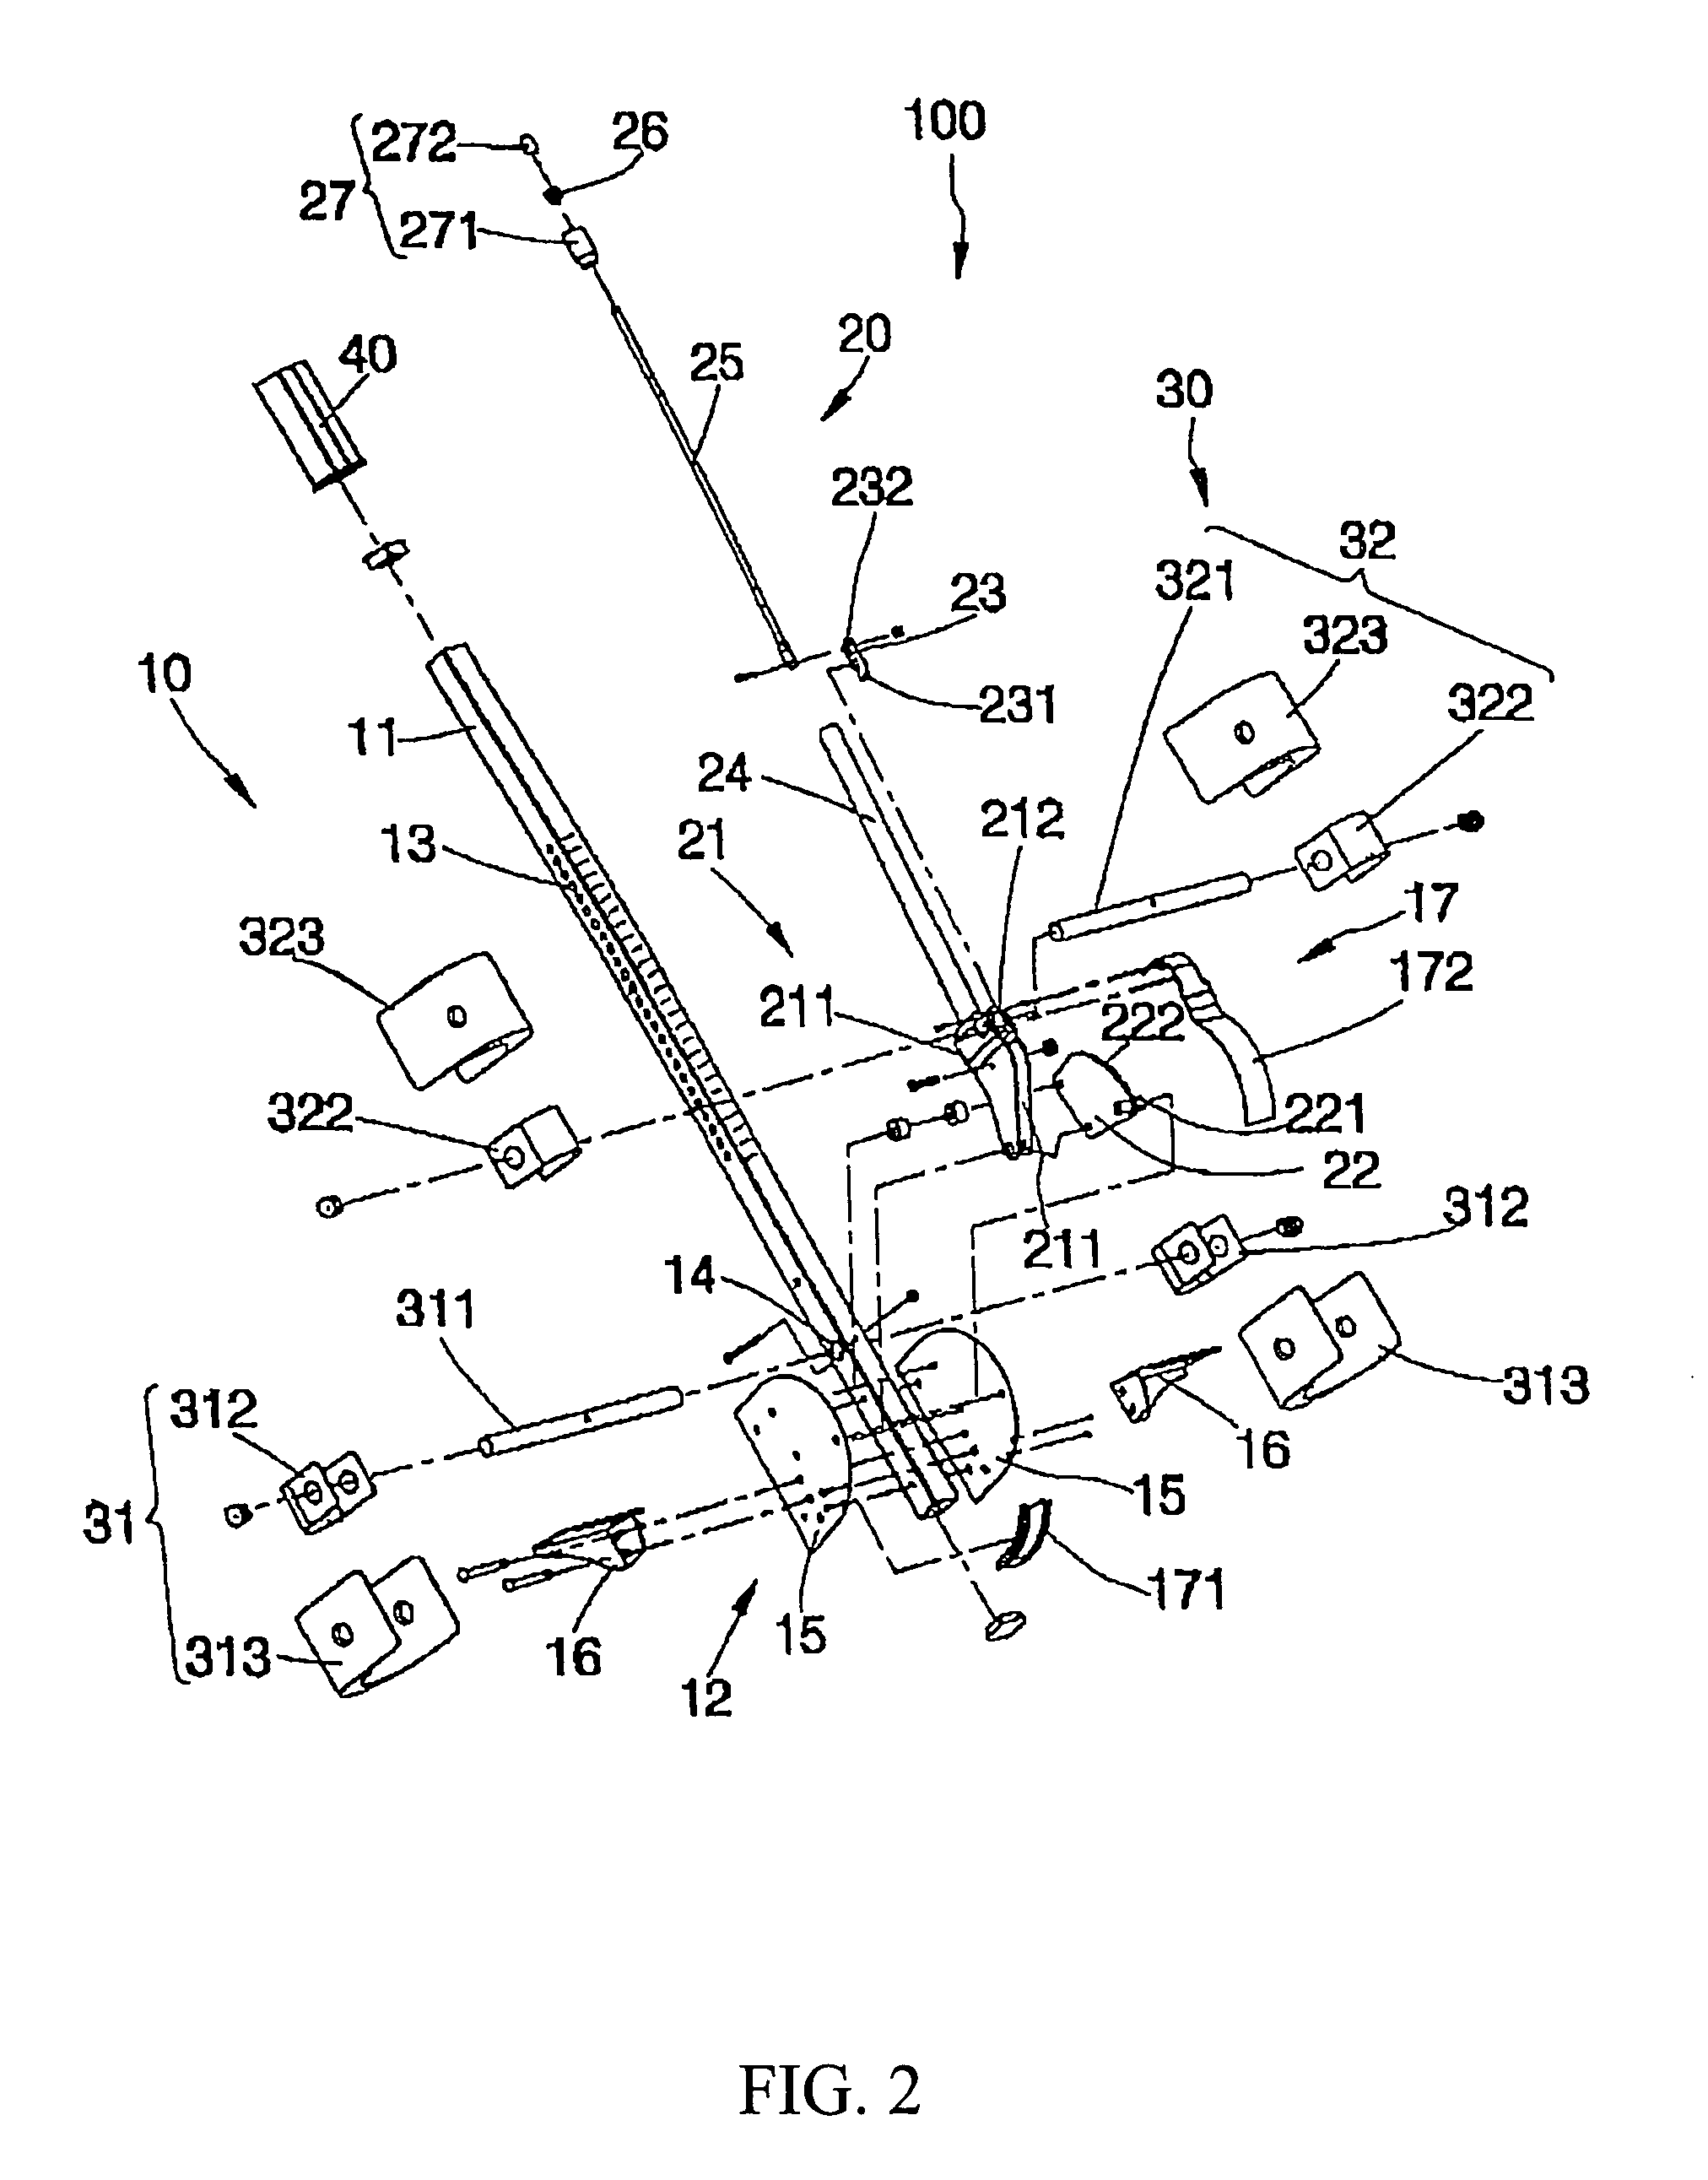 Feet-binding apparatus for a tilting inversion exercise machine